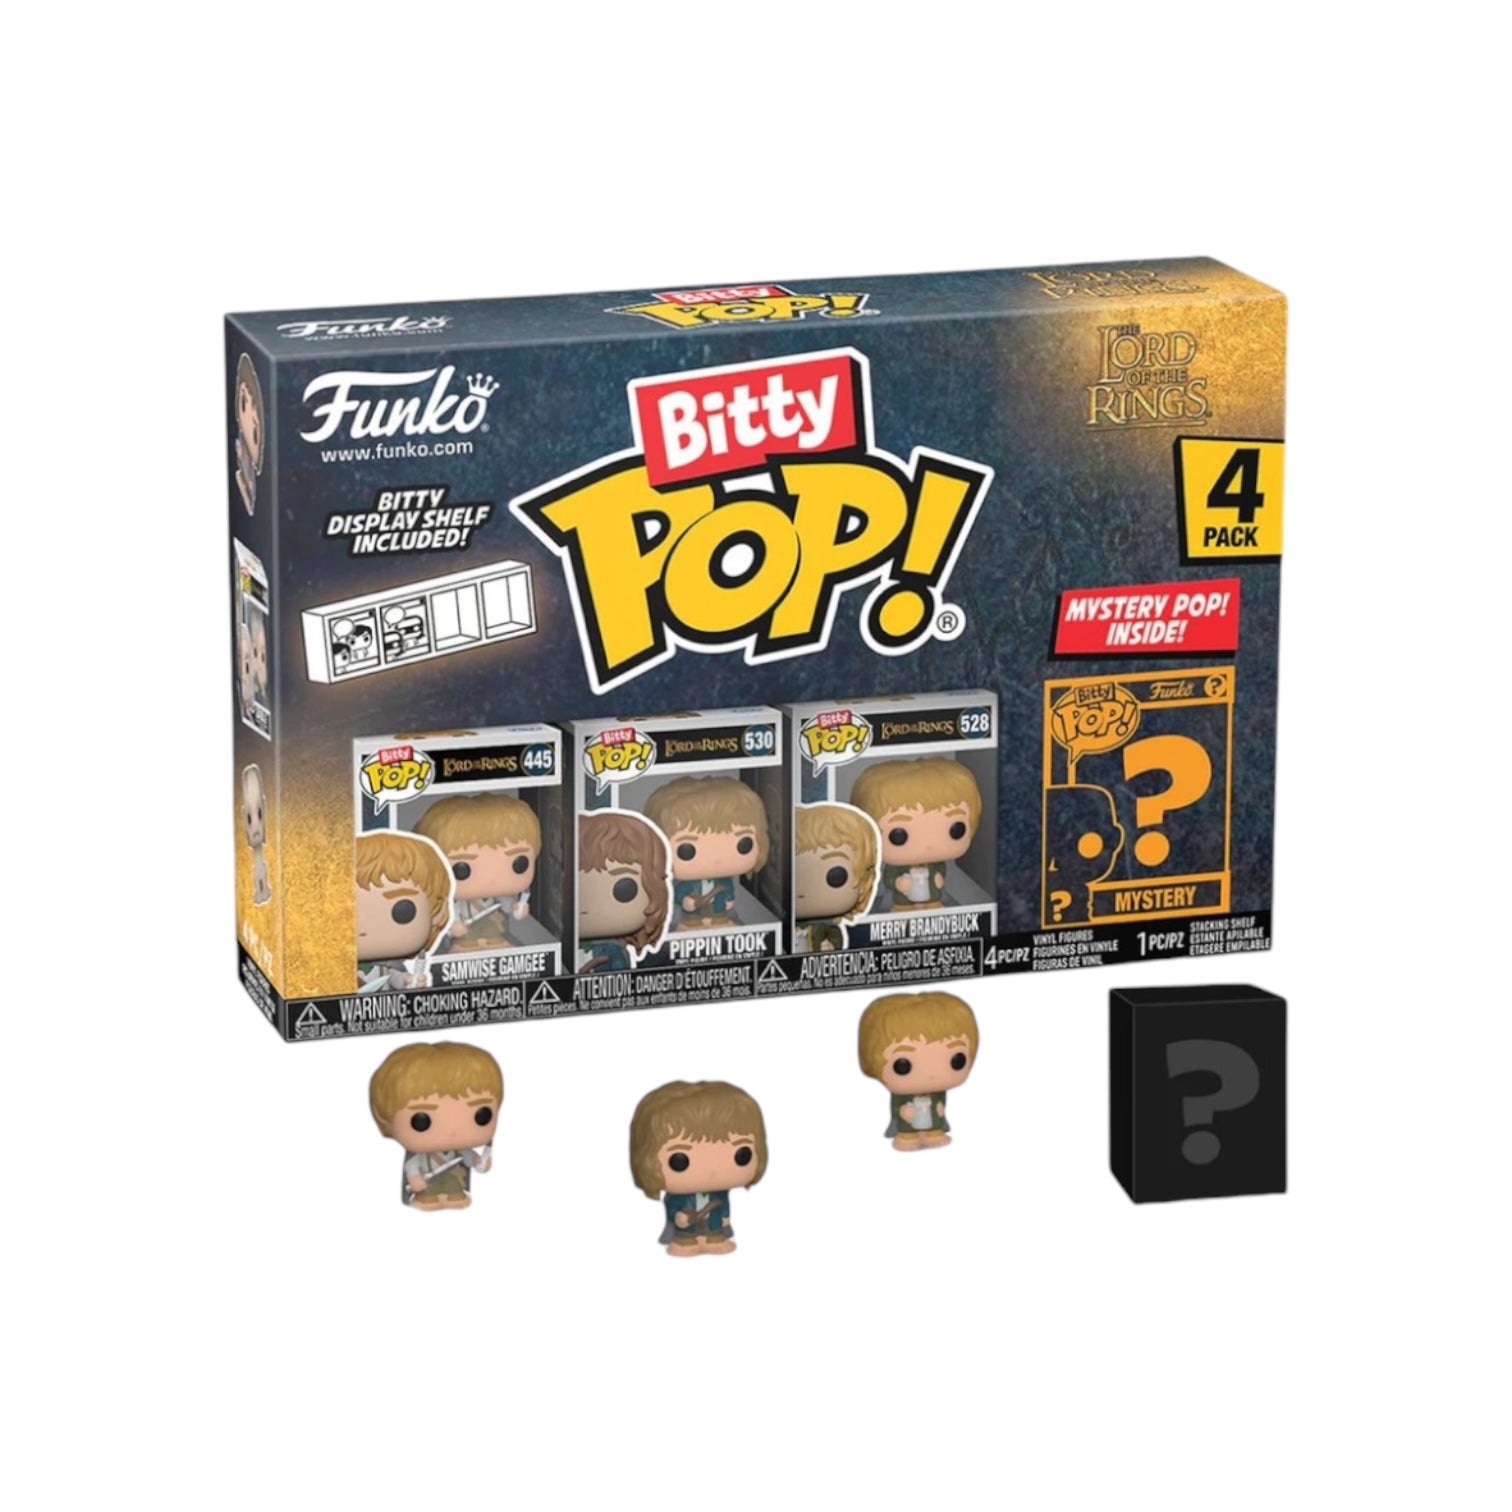 Samwise 4 Pack Bitty Funko Pop! - Lord of the Rings - Chance Of Chase - PREORDER